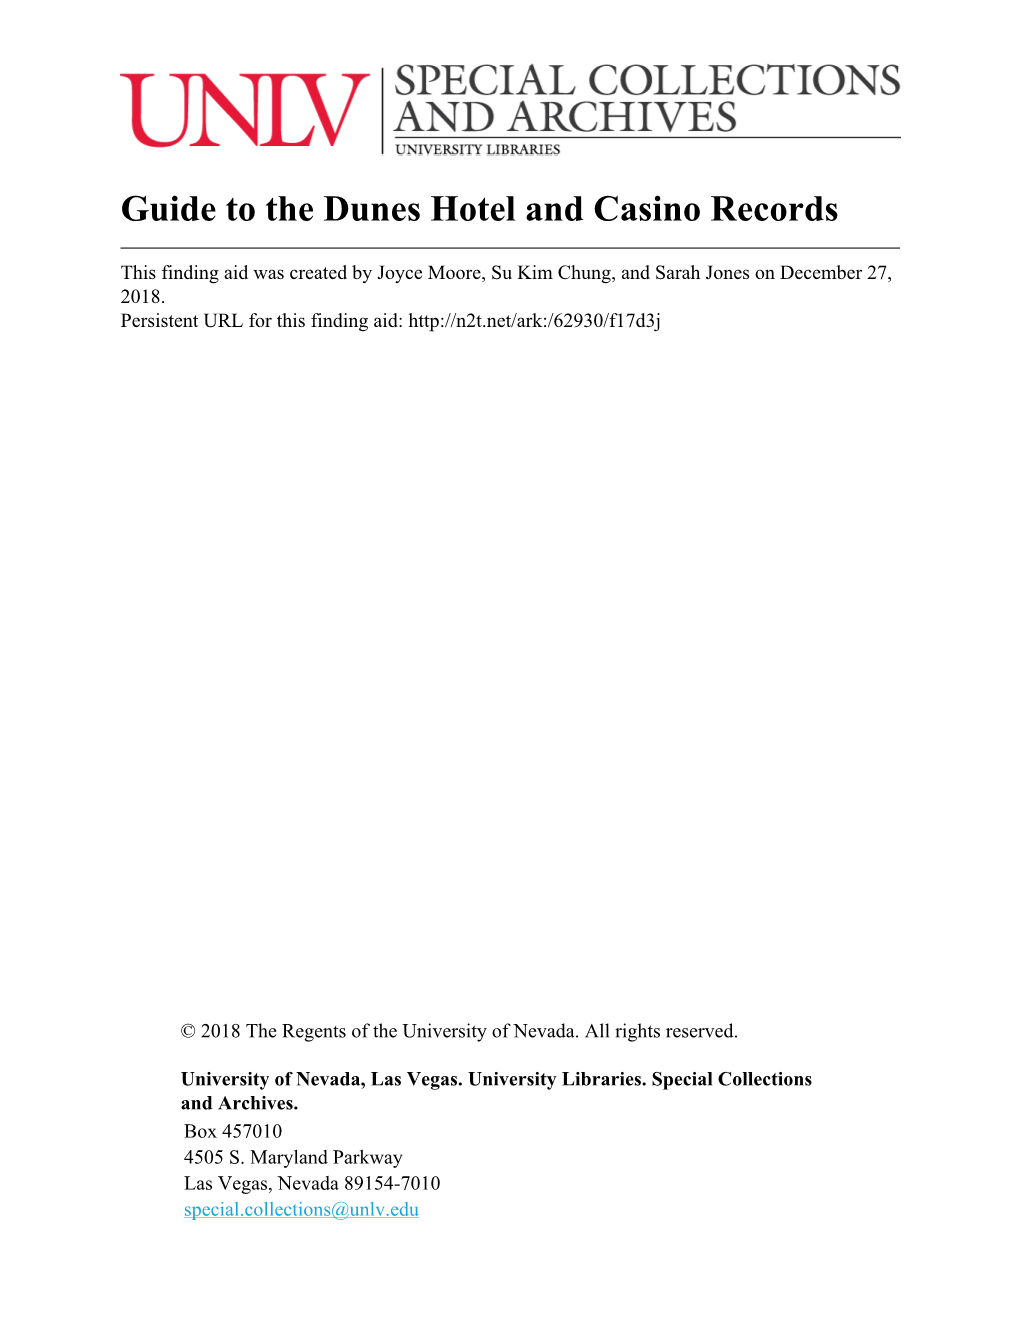 Guide to the Dunes Hotel and Casino Records